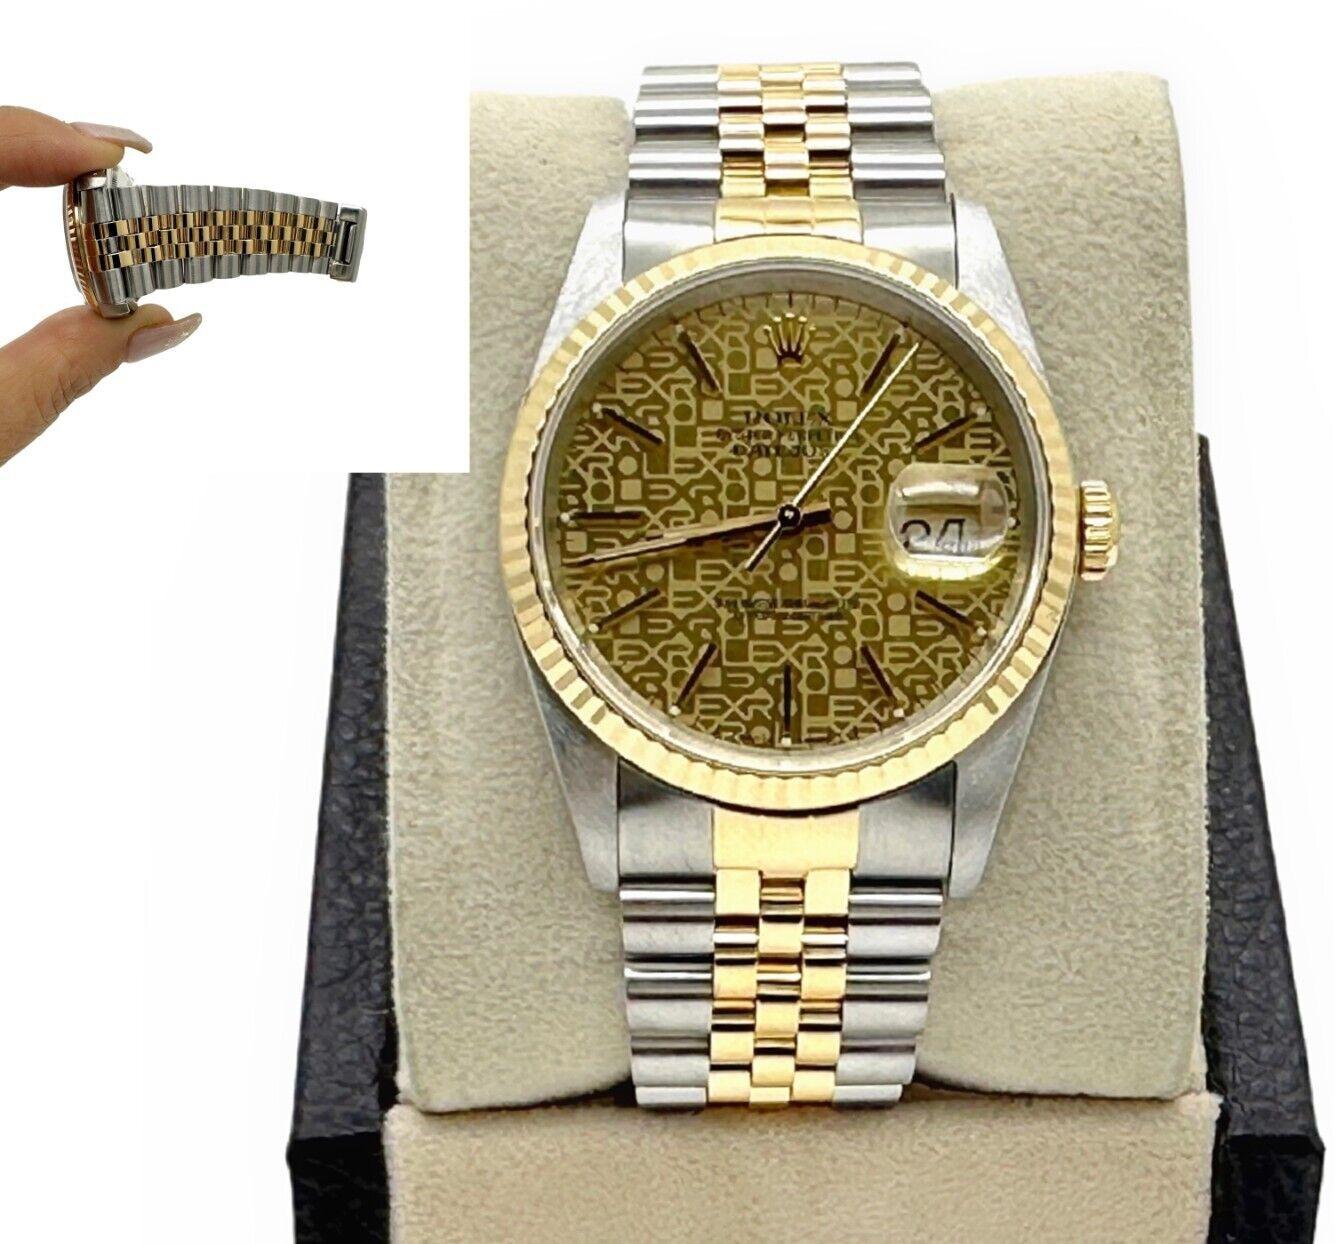 Style Number: 16233

Serial: L961***

Year: 1989

Model: Datejust

Case Material: Stainless Steel

Band: 18K Yellow Gold & Stainless Steel 

Bezel: 18K Yellow Gold

Dial: Champagne Jubilee

Face: Sapphire Crystal

Case Size: 36mm

Includes: